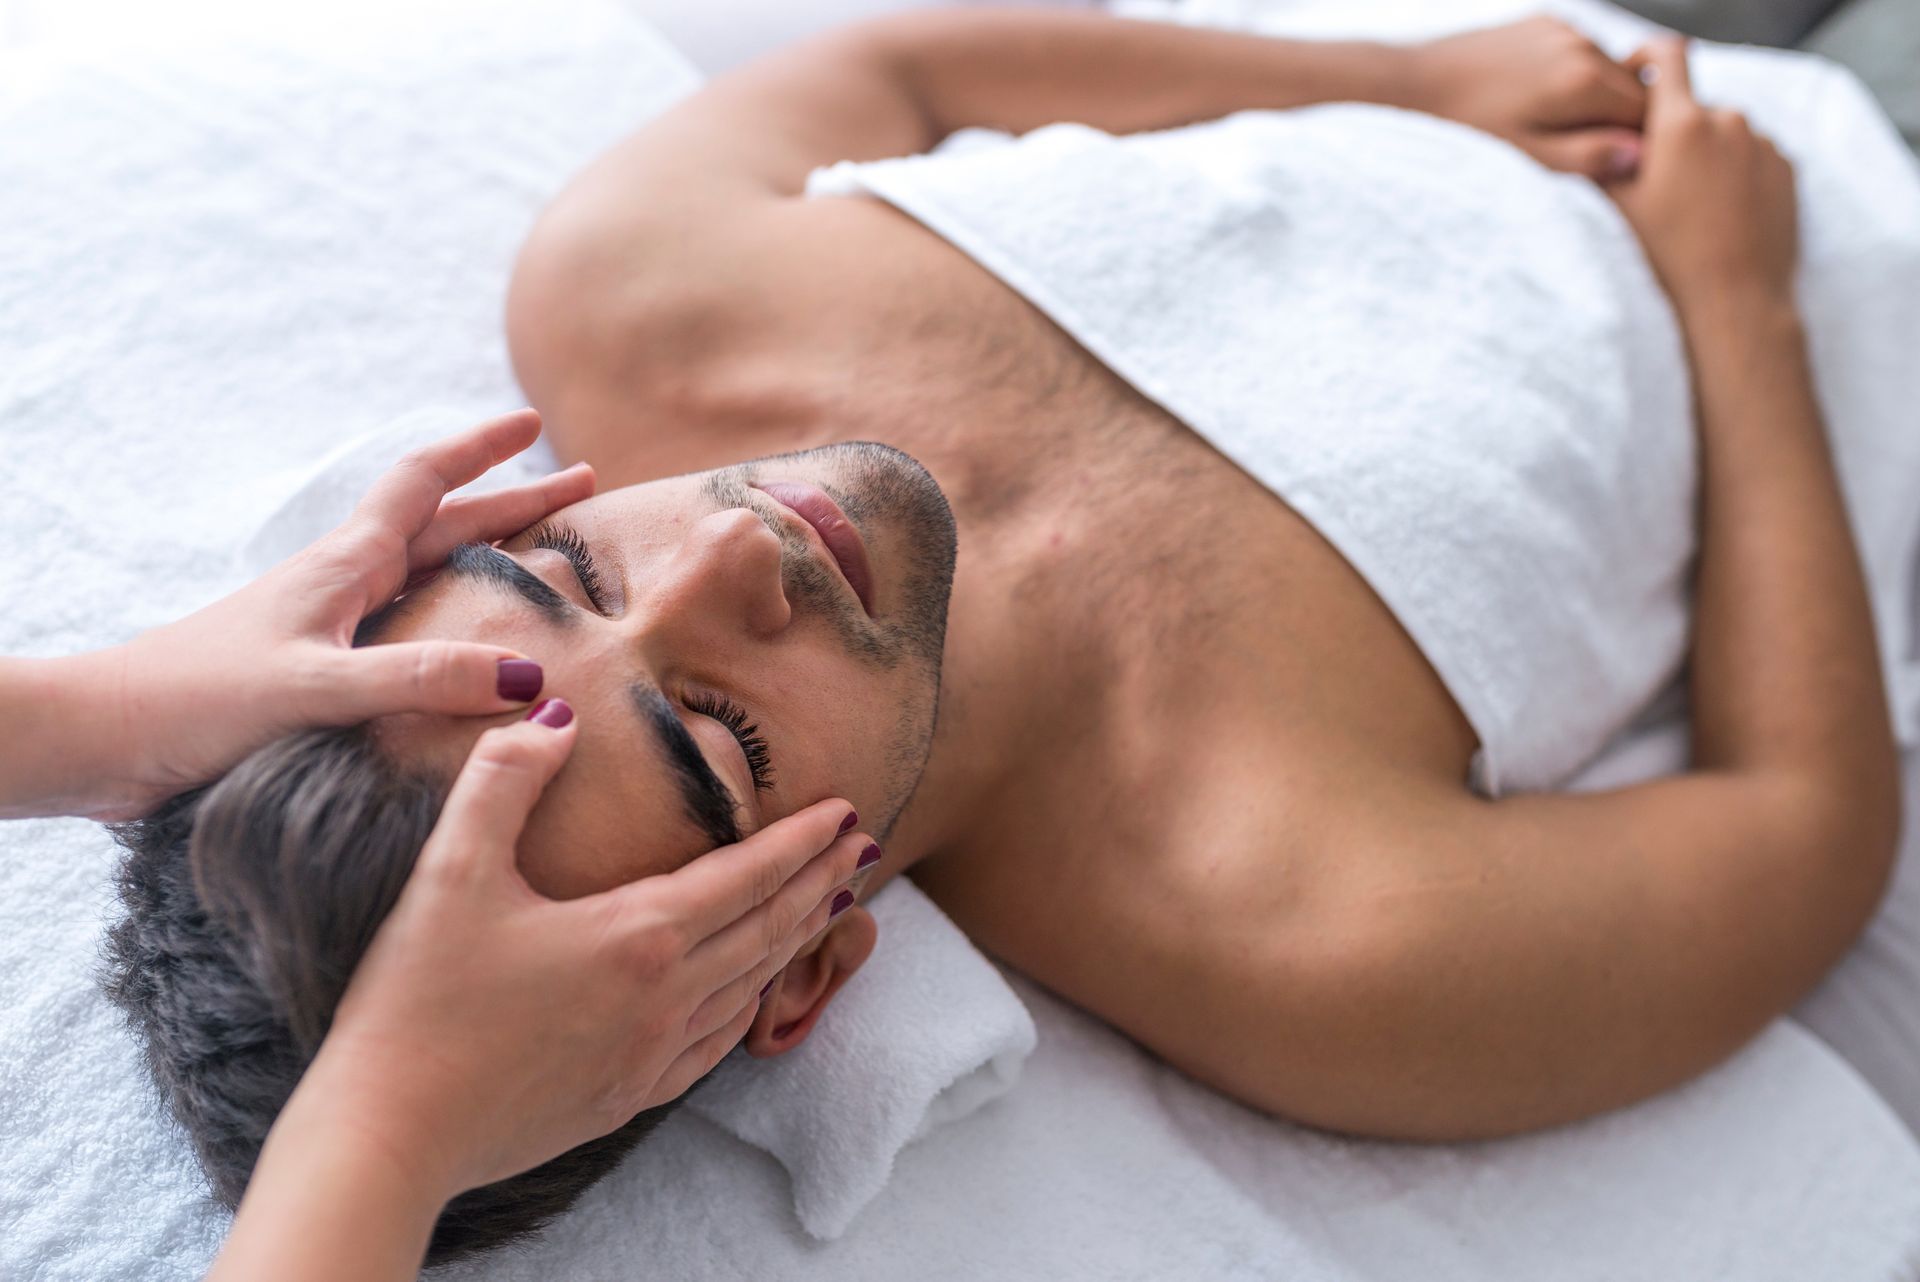 A man is getting a facial at a spa.